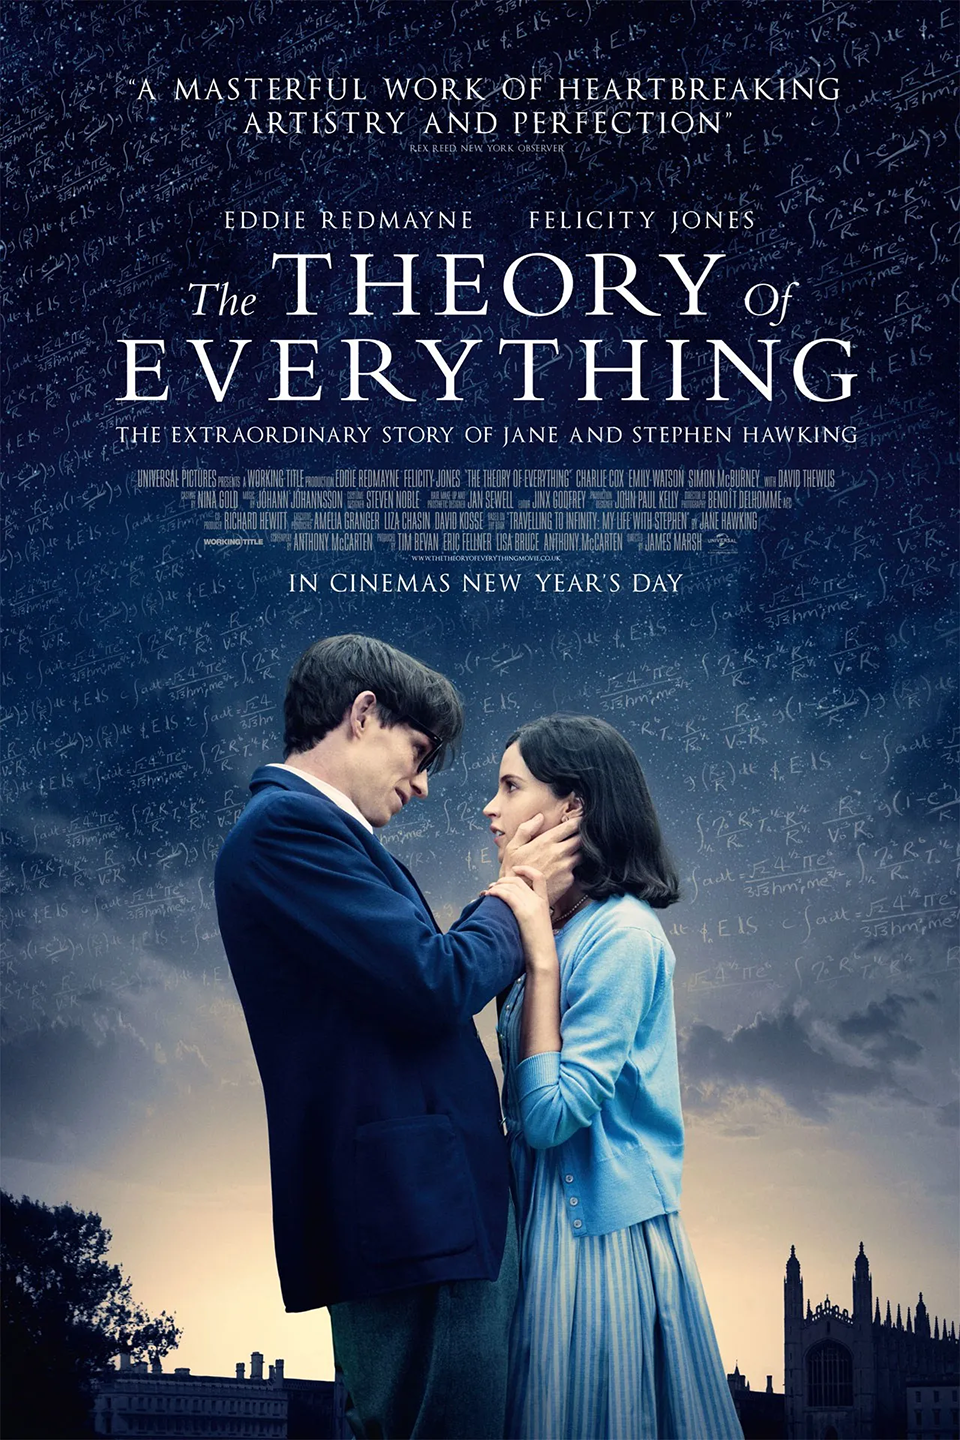 The Theory of Everything (2014) Feature-Film :: Uni-versal Extras